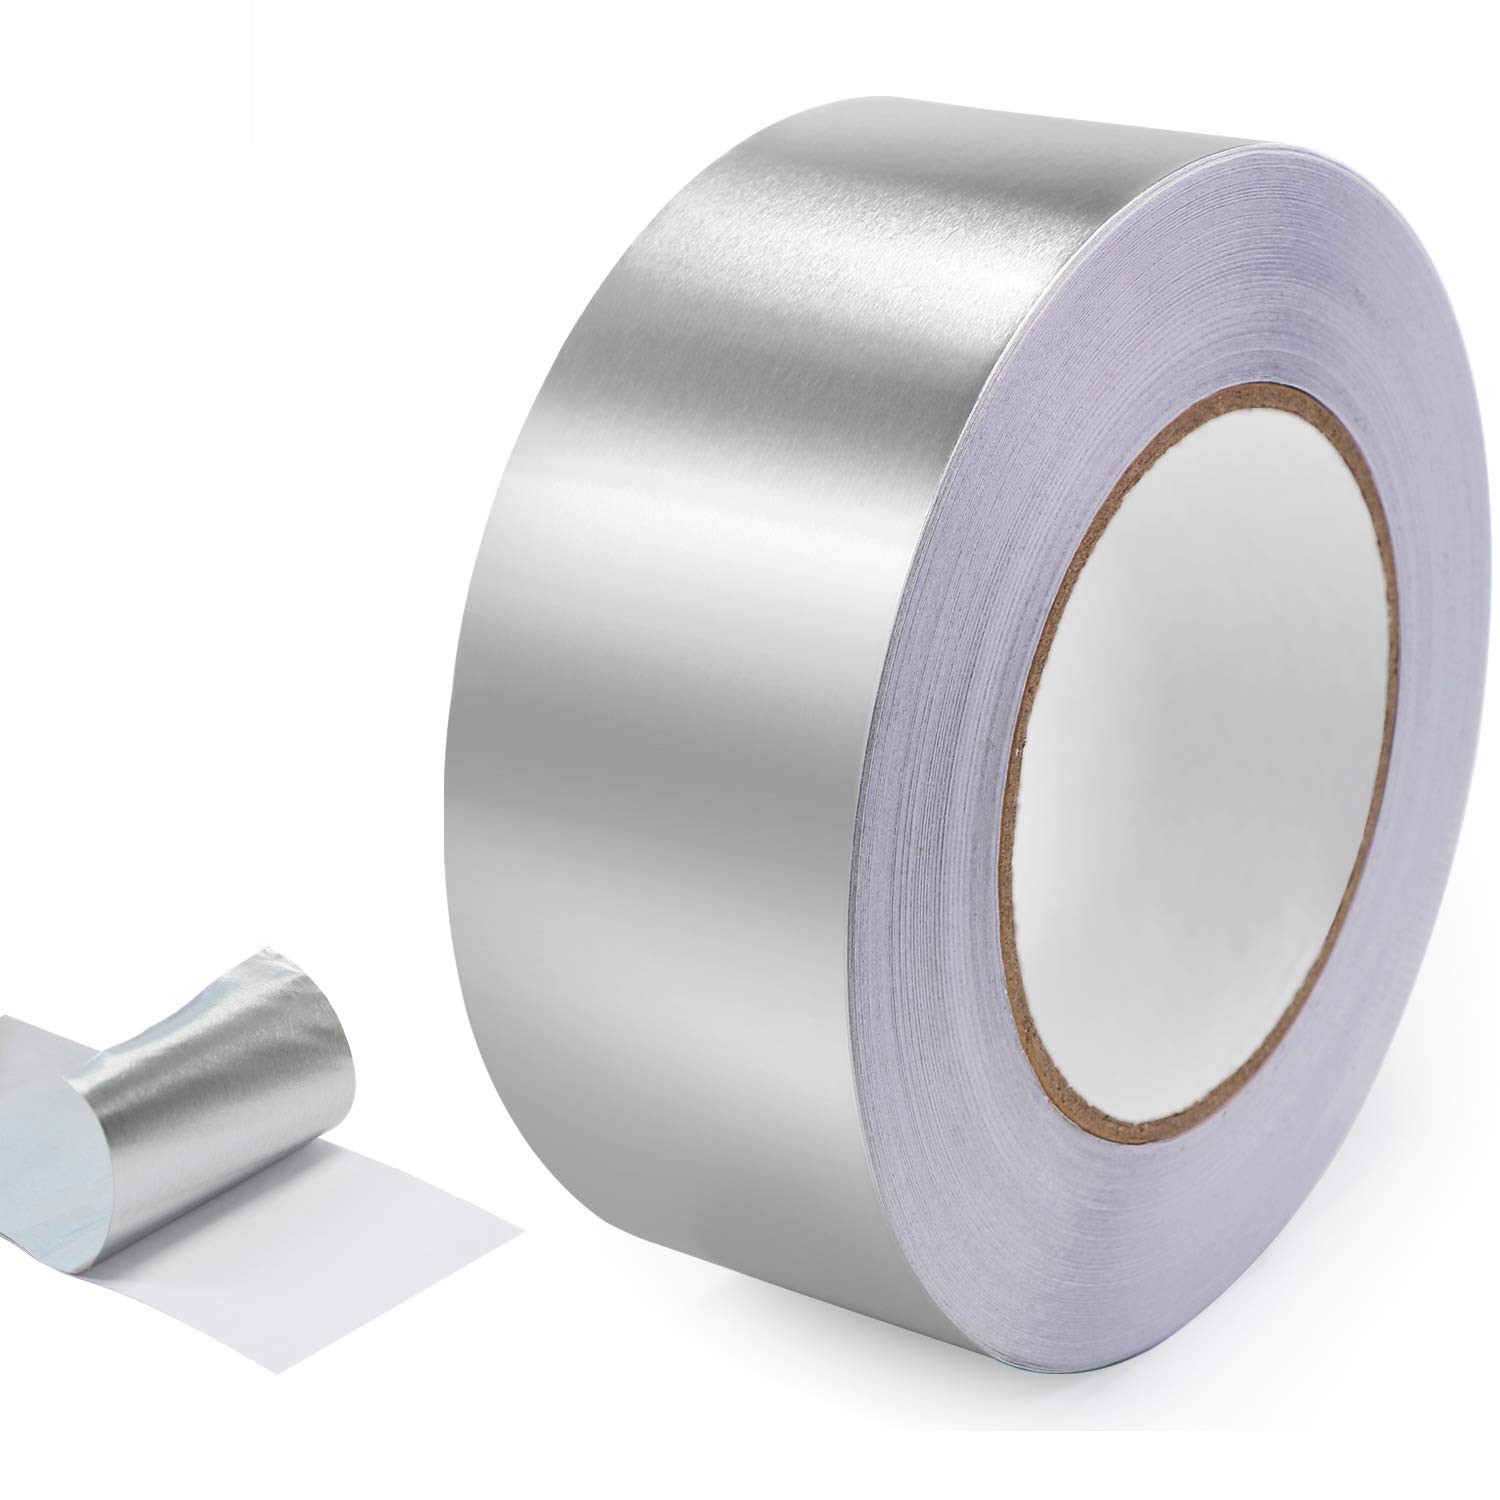 Need Durability and Strength. Discover the Power of Silver Aluminum Foil Tape